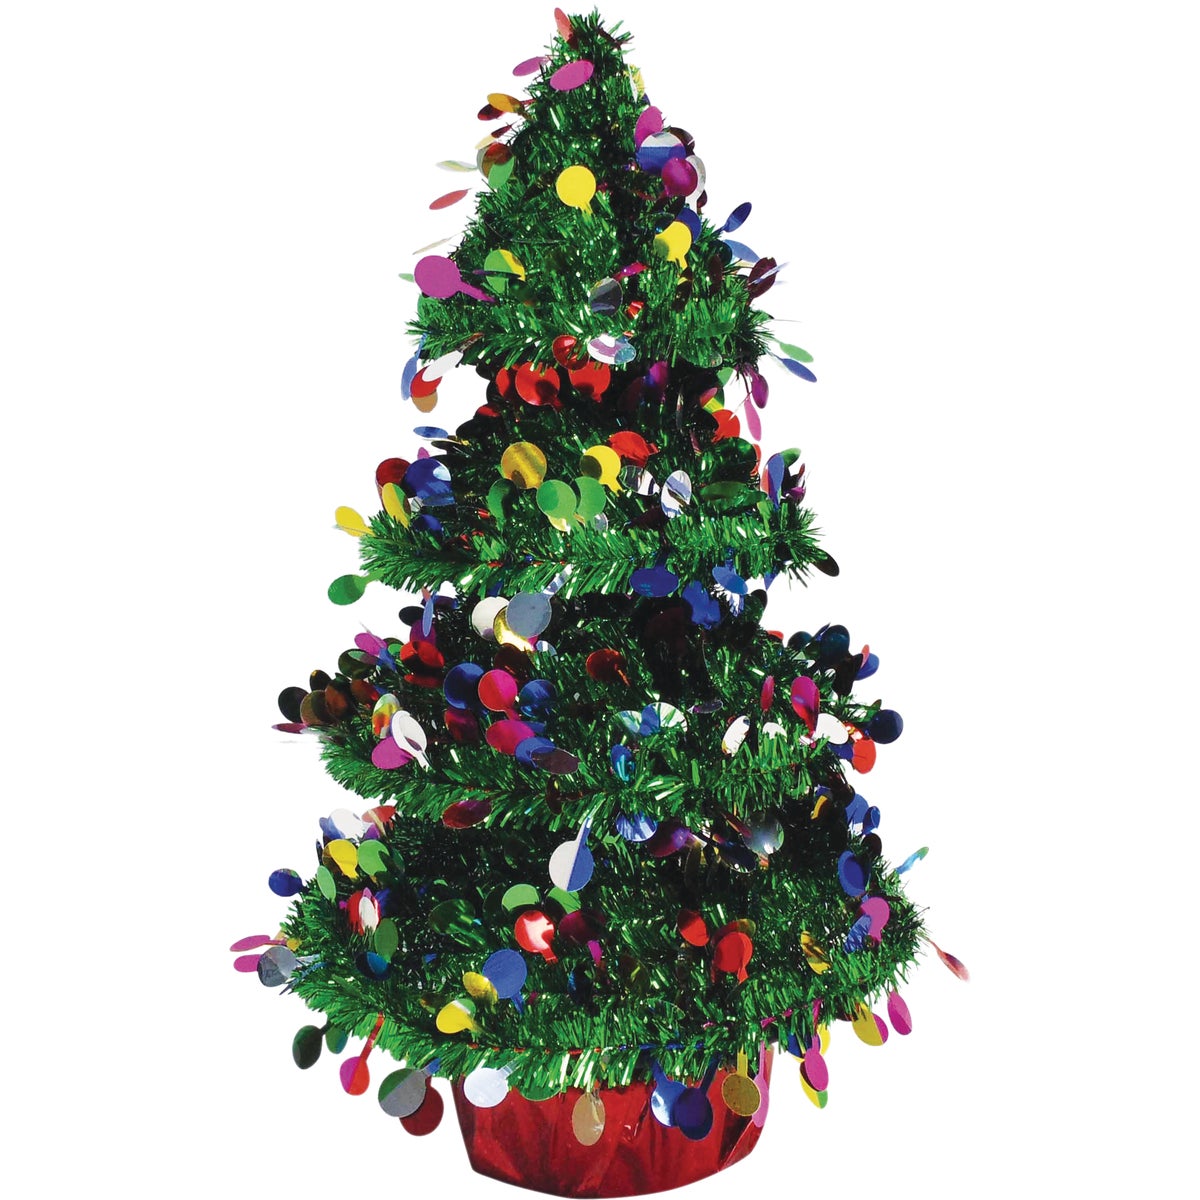 Youngcraft 14 In. Green 3-Dimensional Christmas Tree 3D-TREE Pack of 6 - image 1 of 2